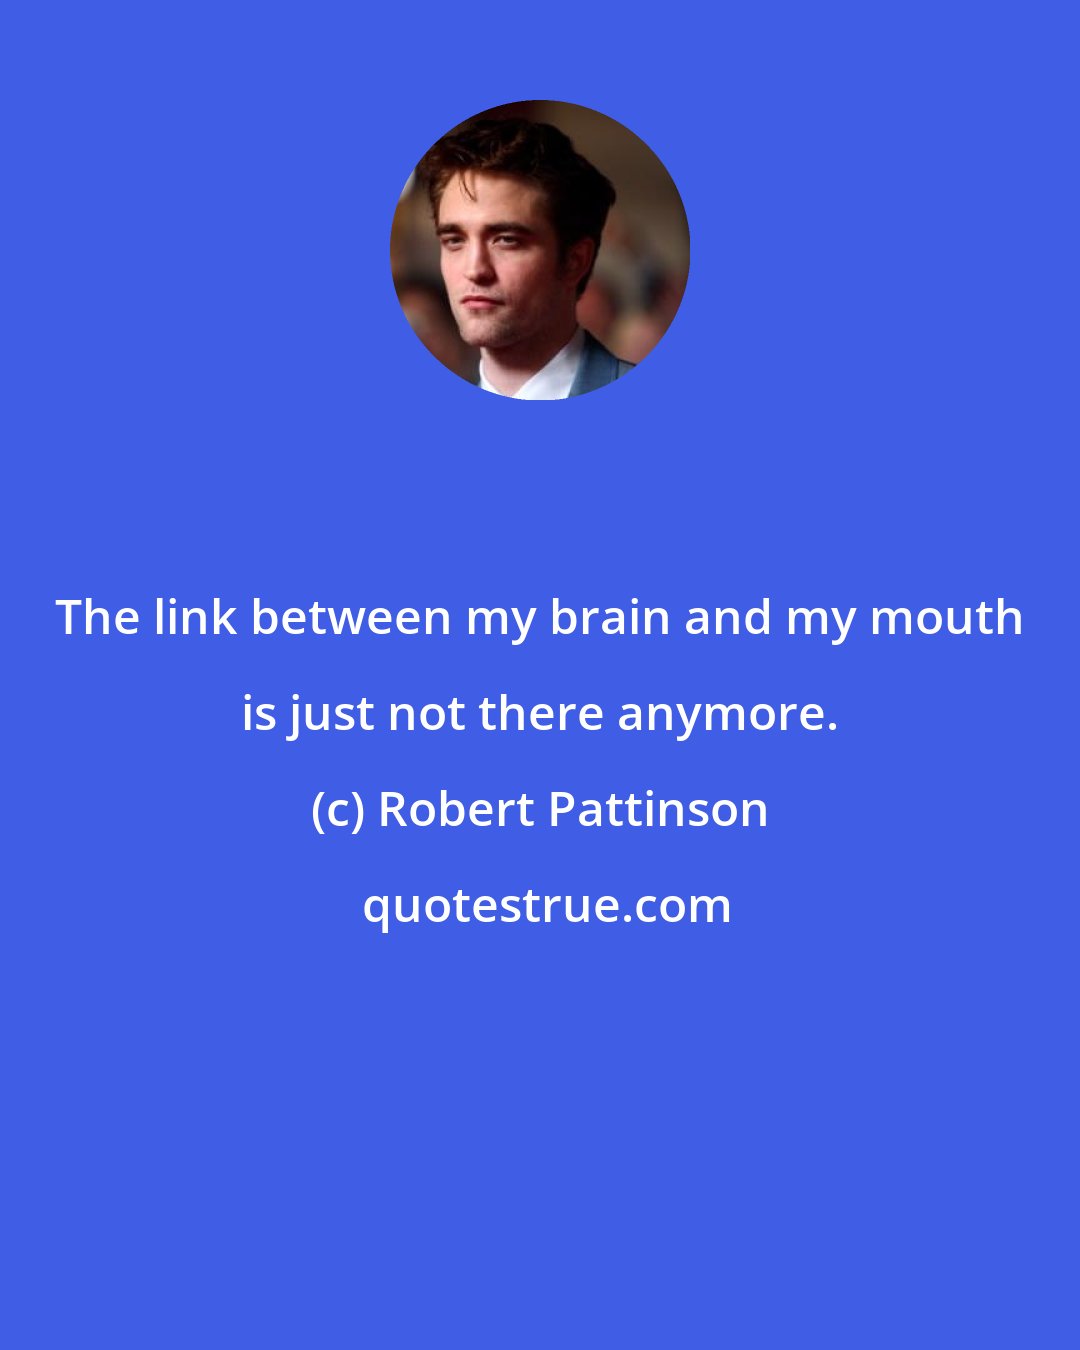 Robert Pattinson: The link between my brain and my mouth is just not there anymore.